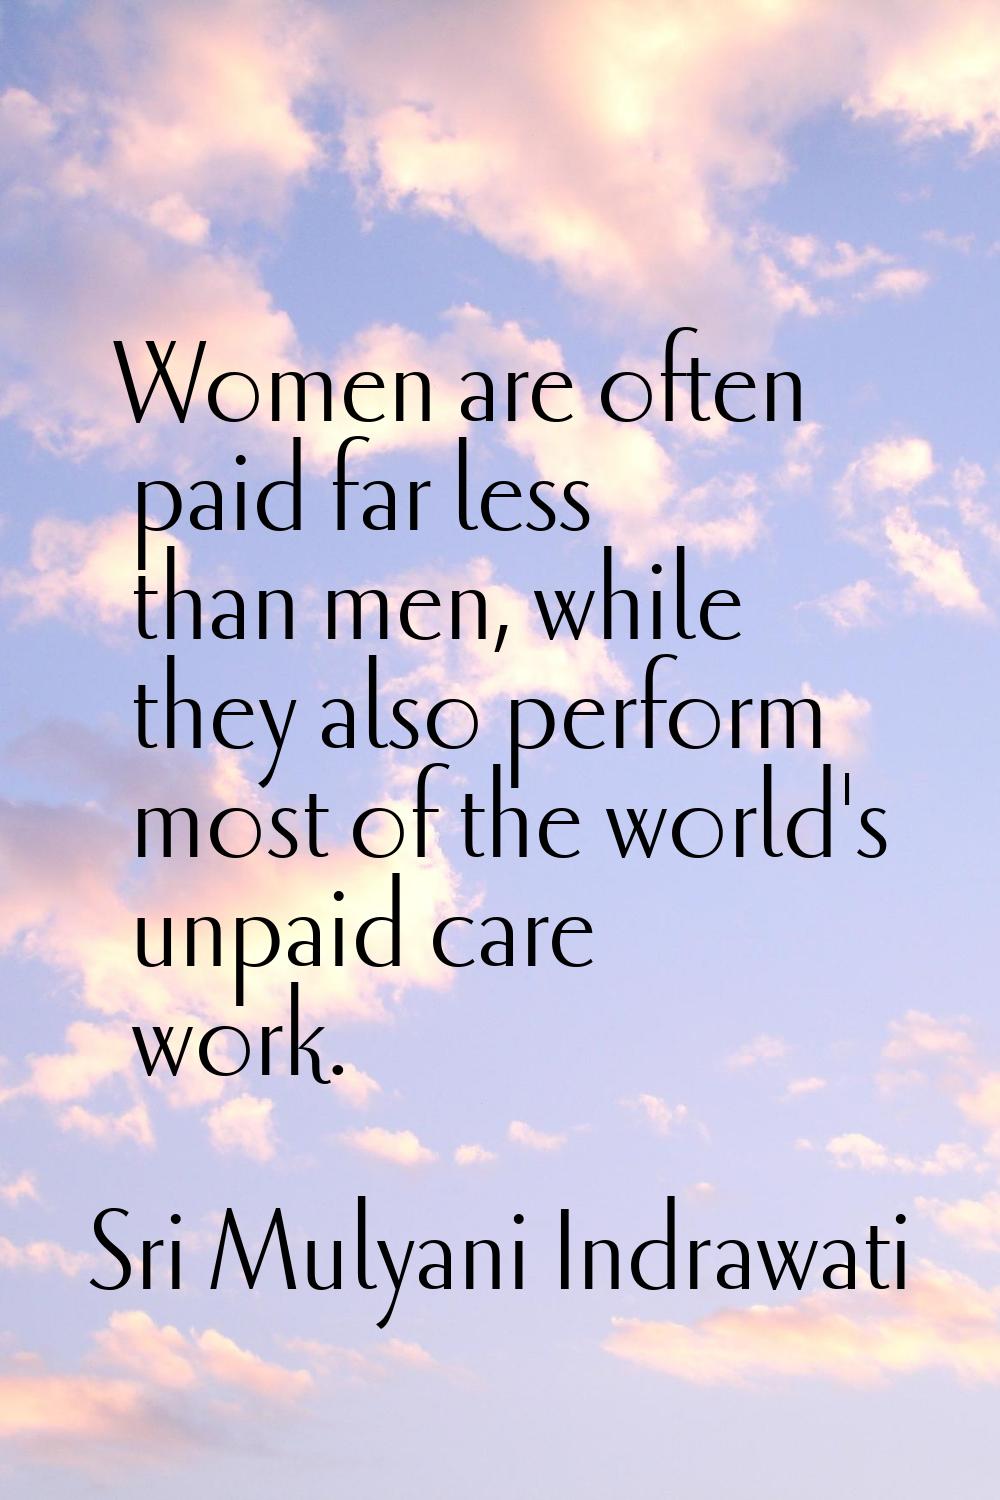 Women are often paid far less than men, while they also perform most of the world's unpaid care wor